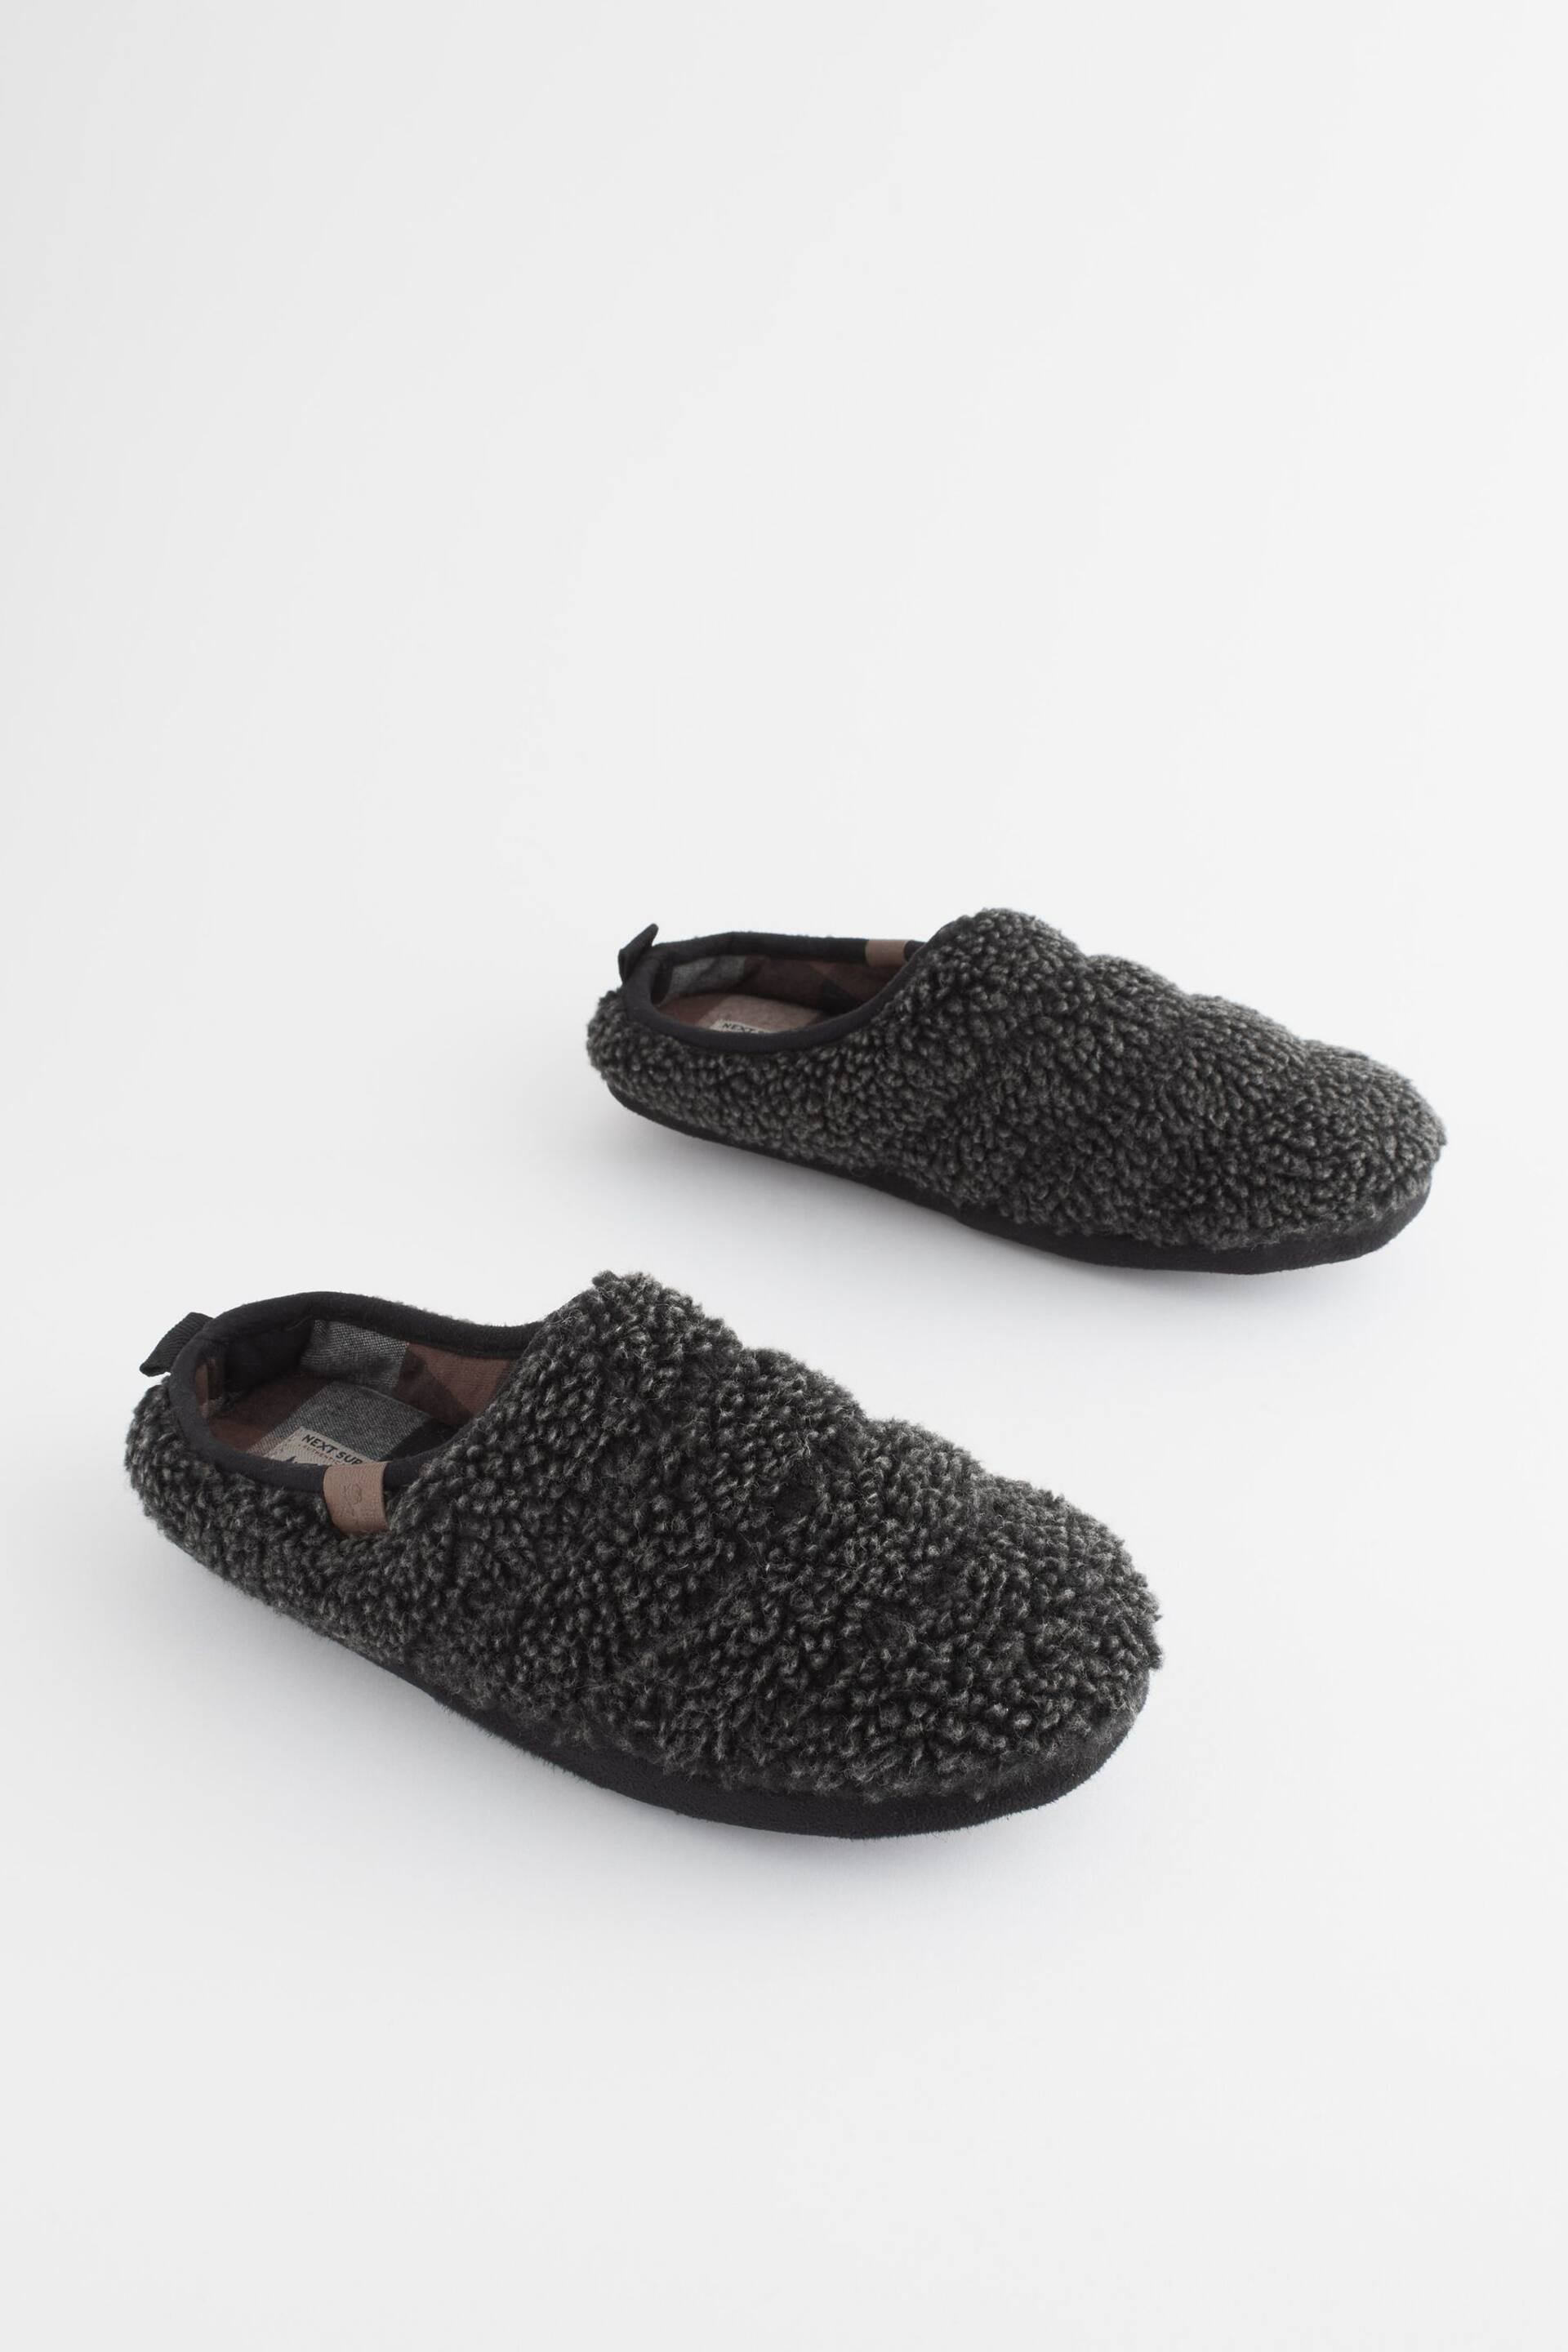 Charcoal Grey Padded Borg Mule Slippers - Image 1 of 7